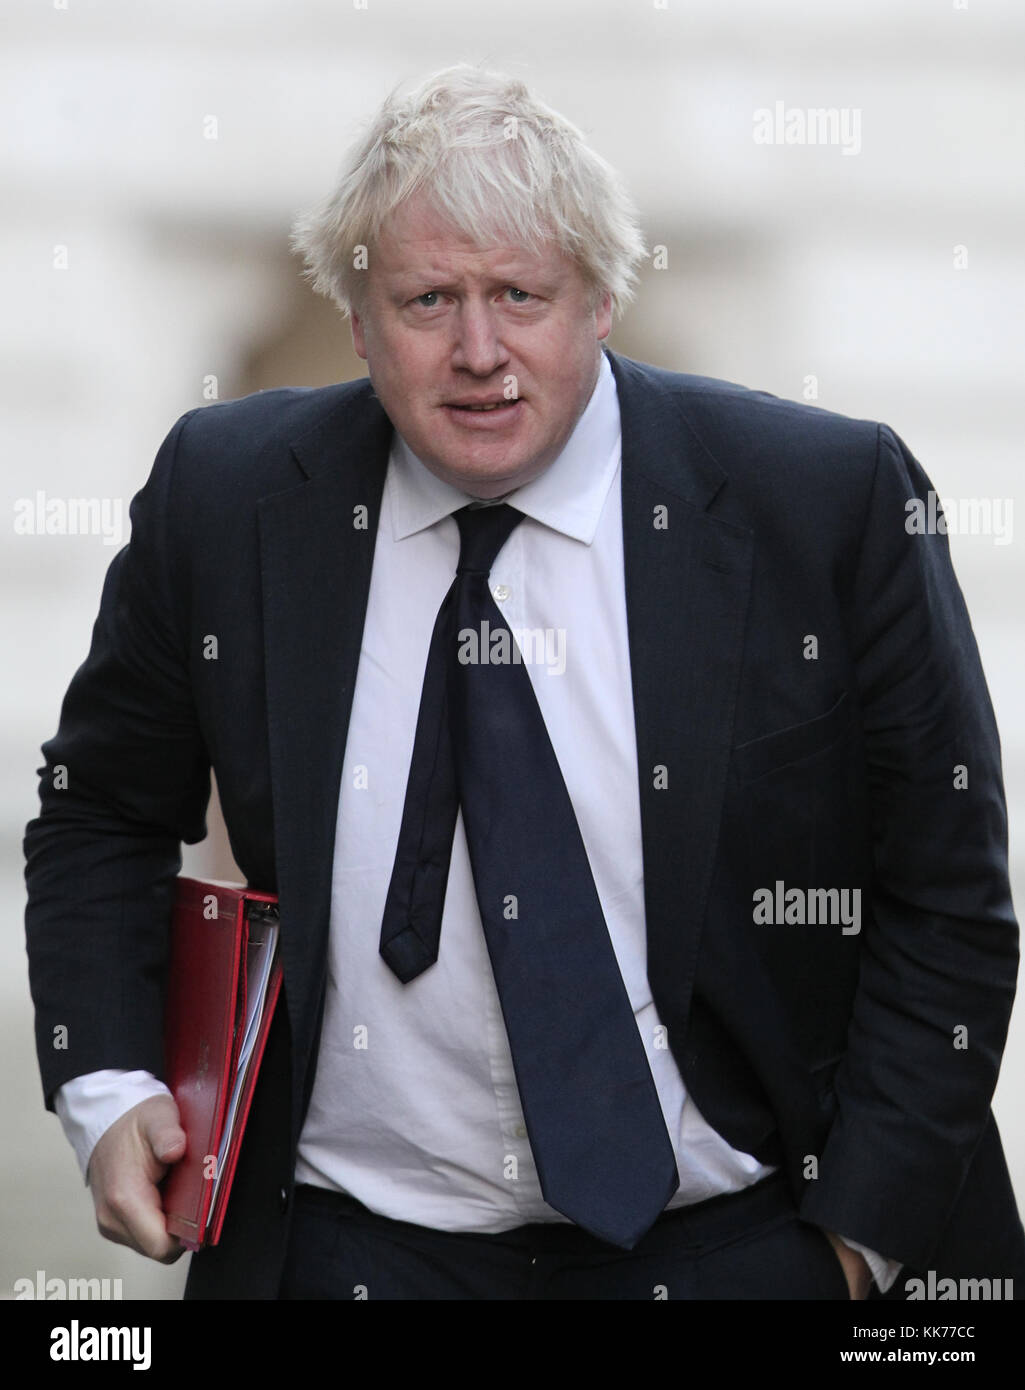 London, UK. 28th November, 2017. Boris Johnson, Secretary of State for Foreign and Commonwealth Affairs attends the weekly cabinet meeting in Downing  Stock Photo